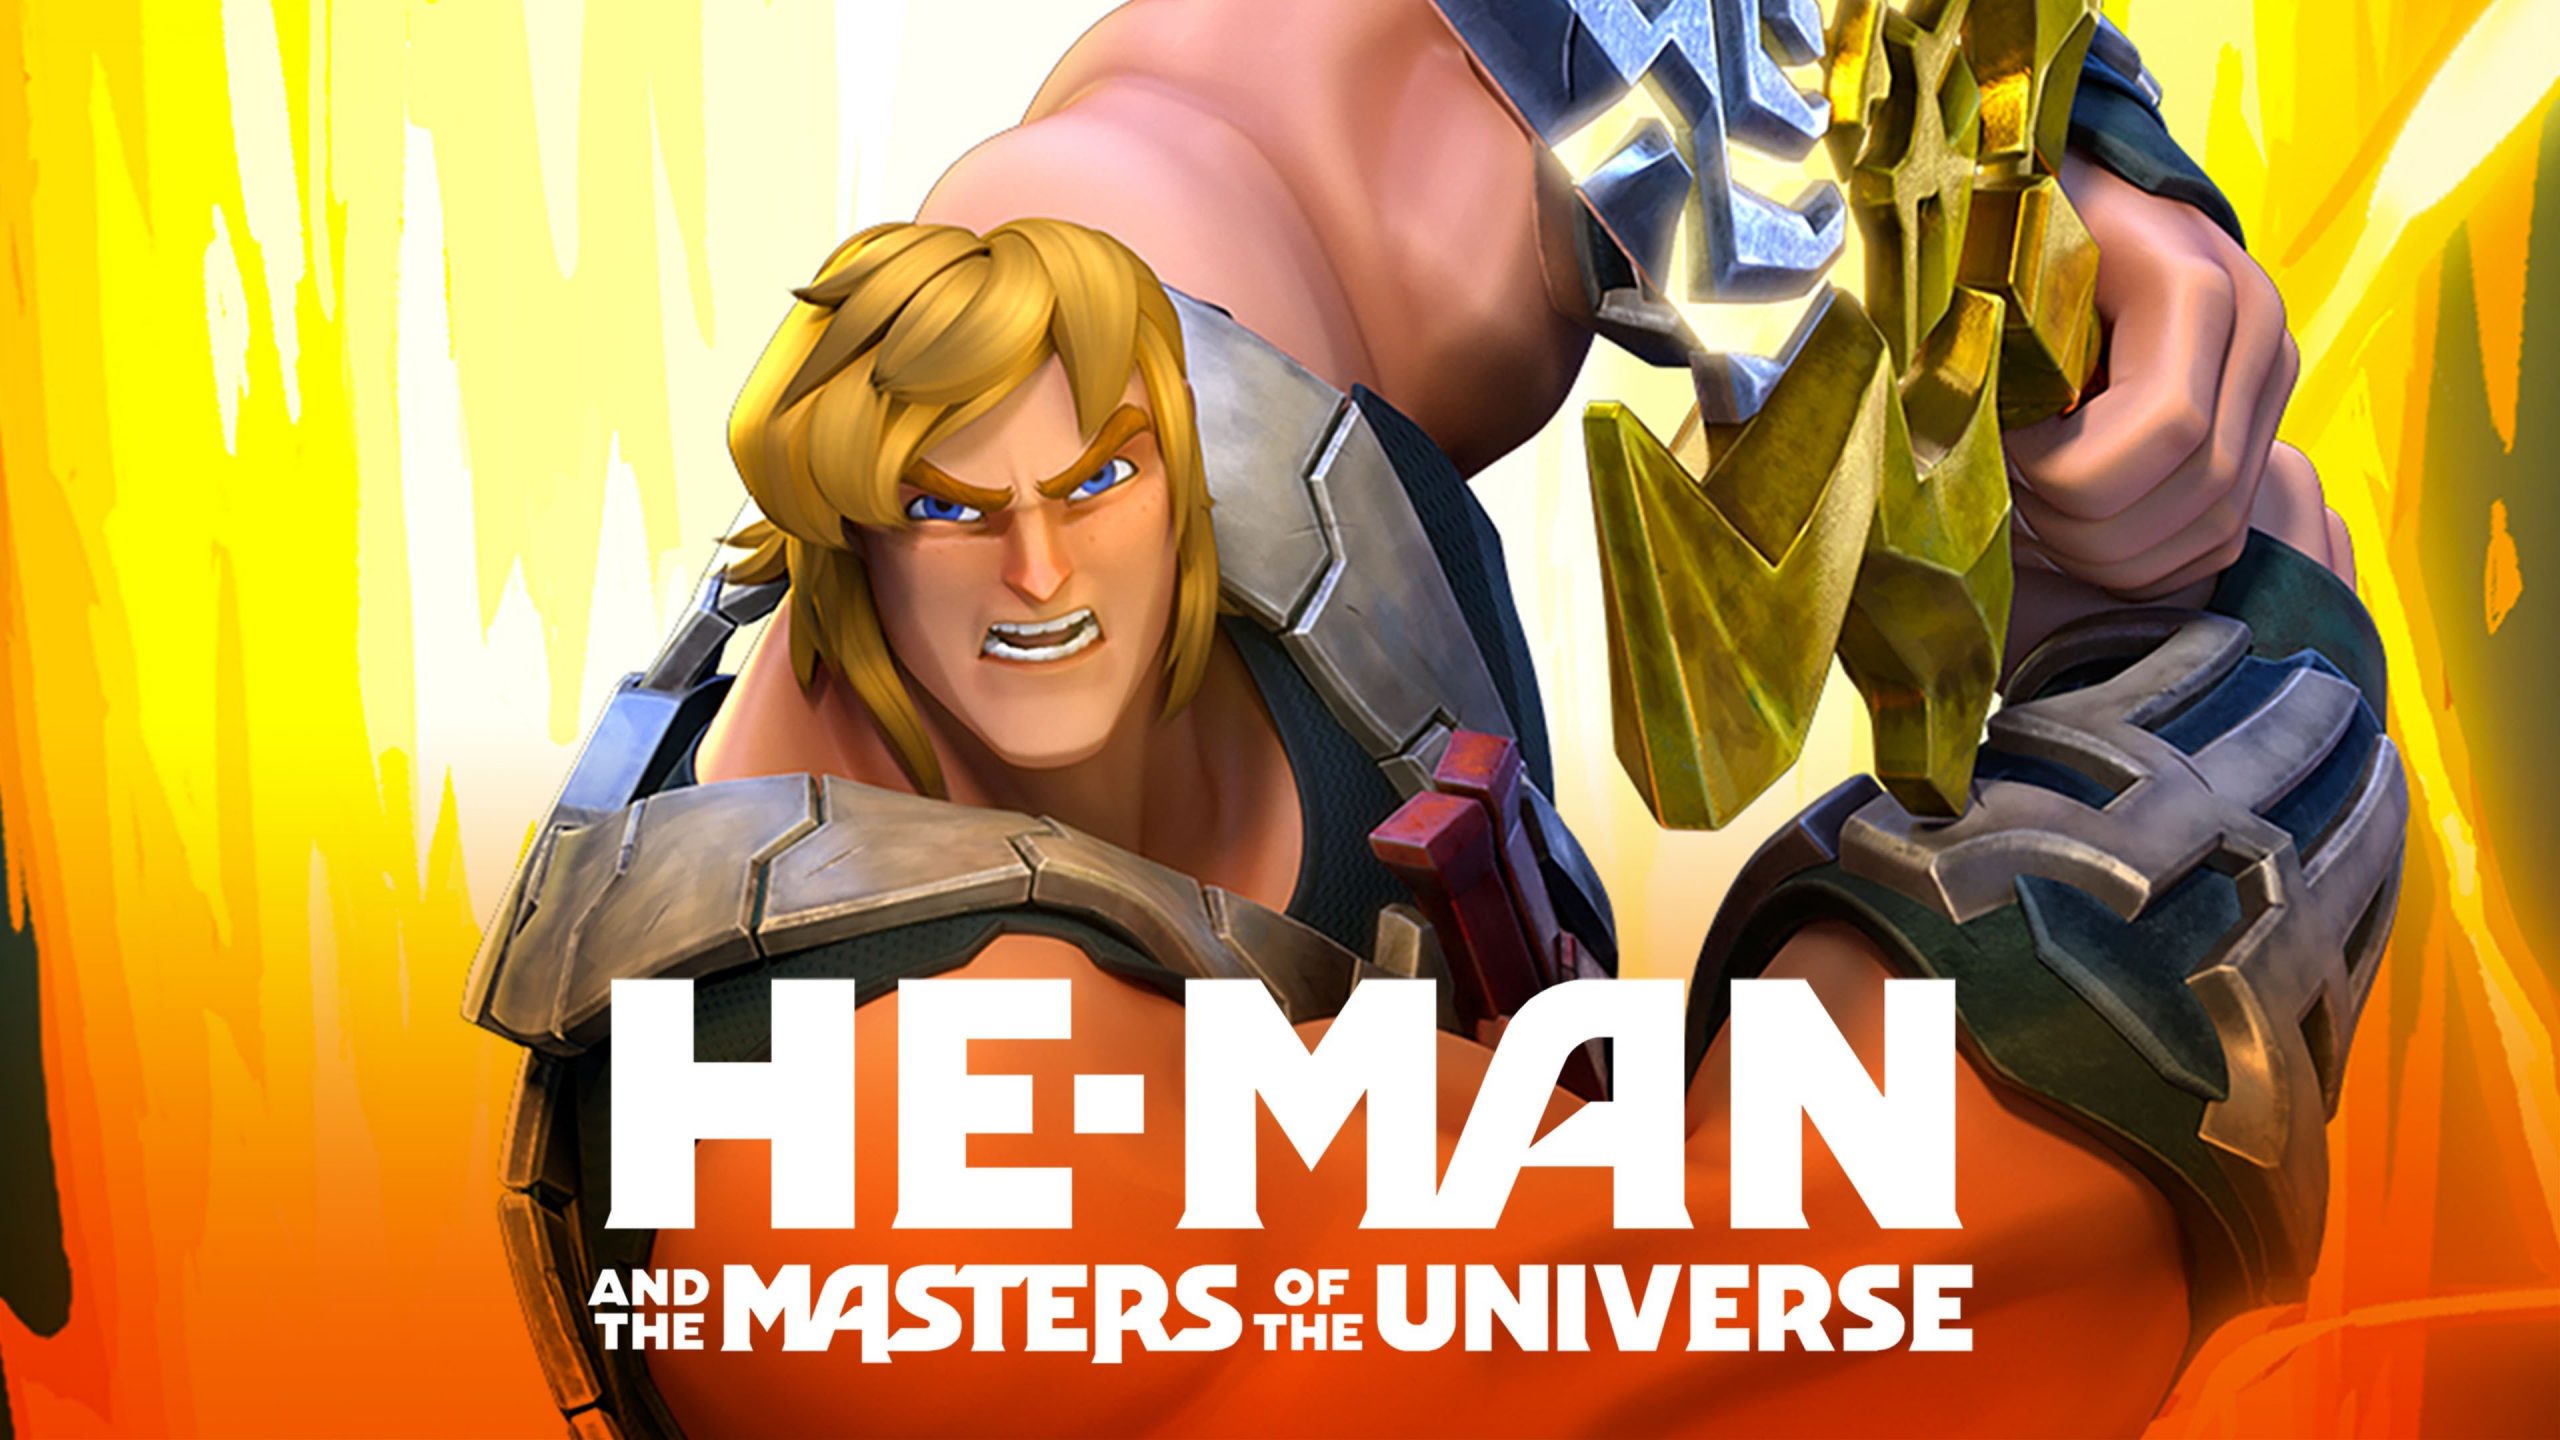 Is He-Man and the Masters of the Universe Season 3 (2022) available on Netflix